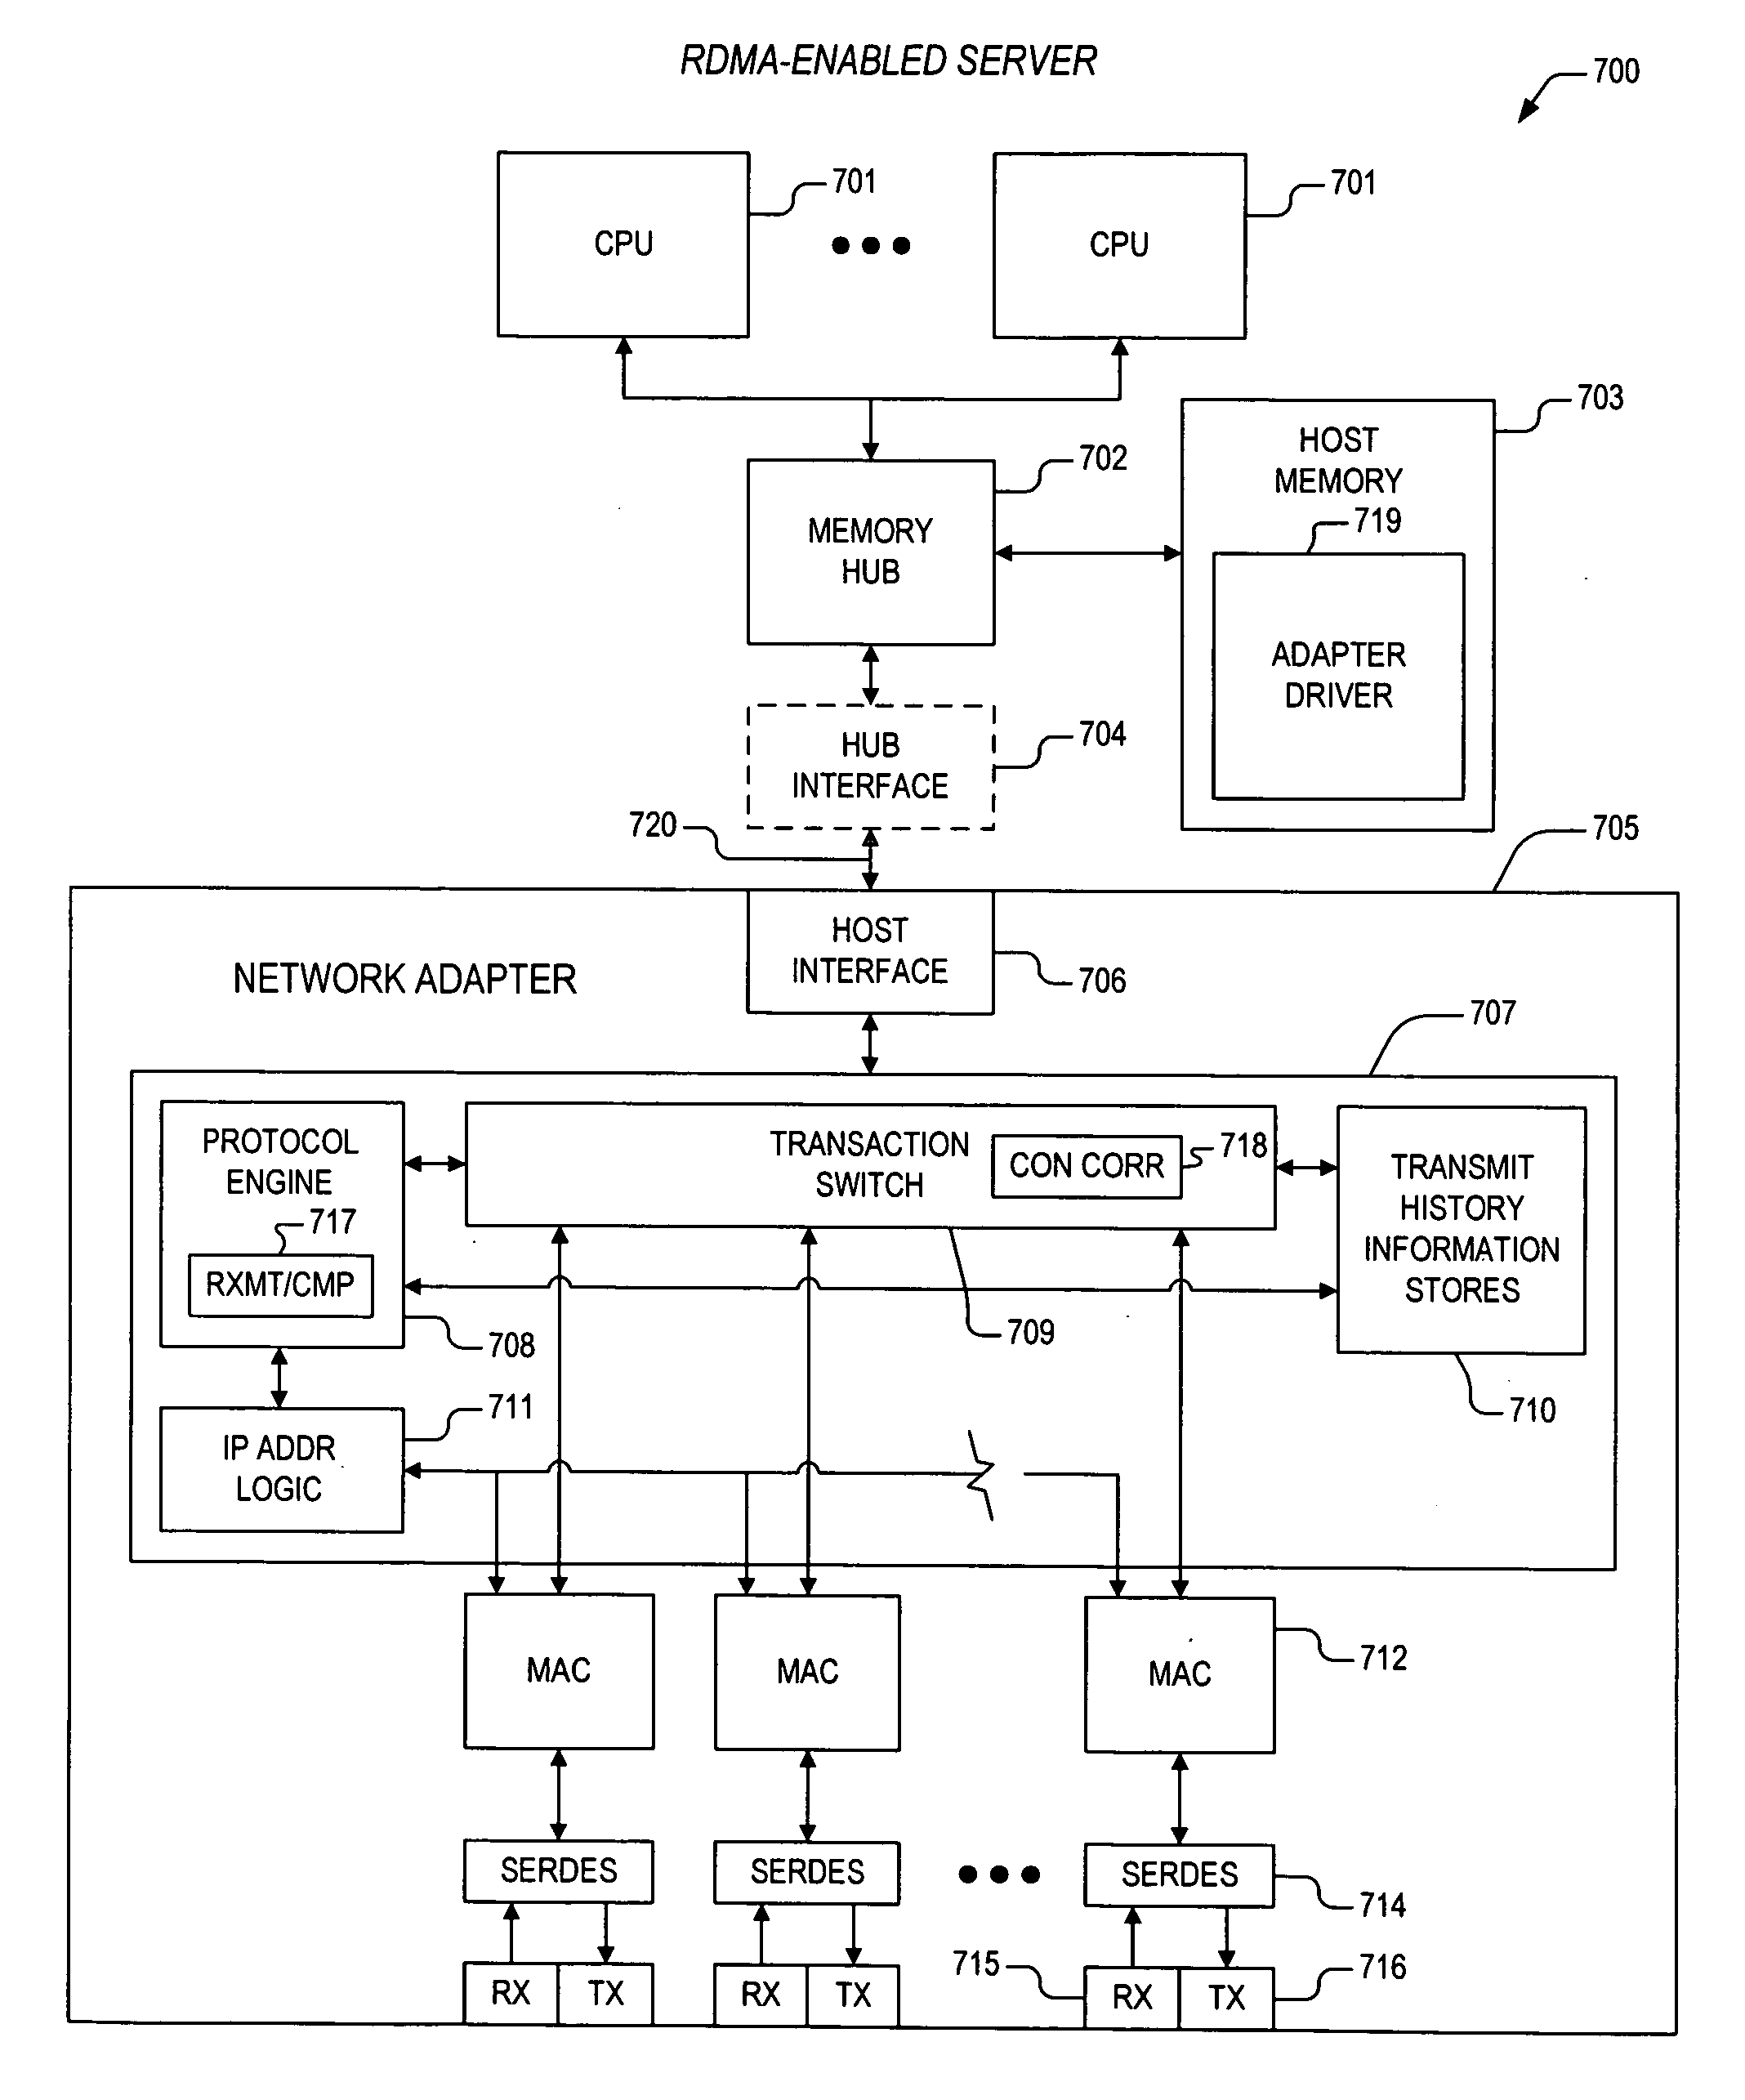 Apparatus and method for out-of-order placement and in-order completion reporting of remote direct memory access operations